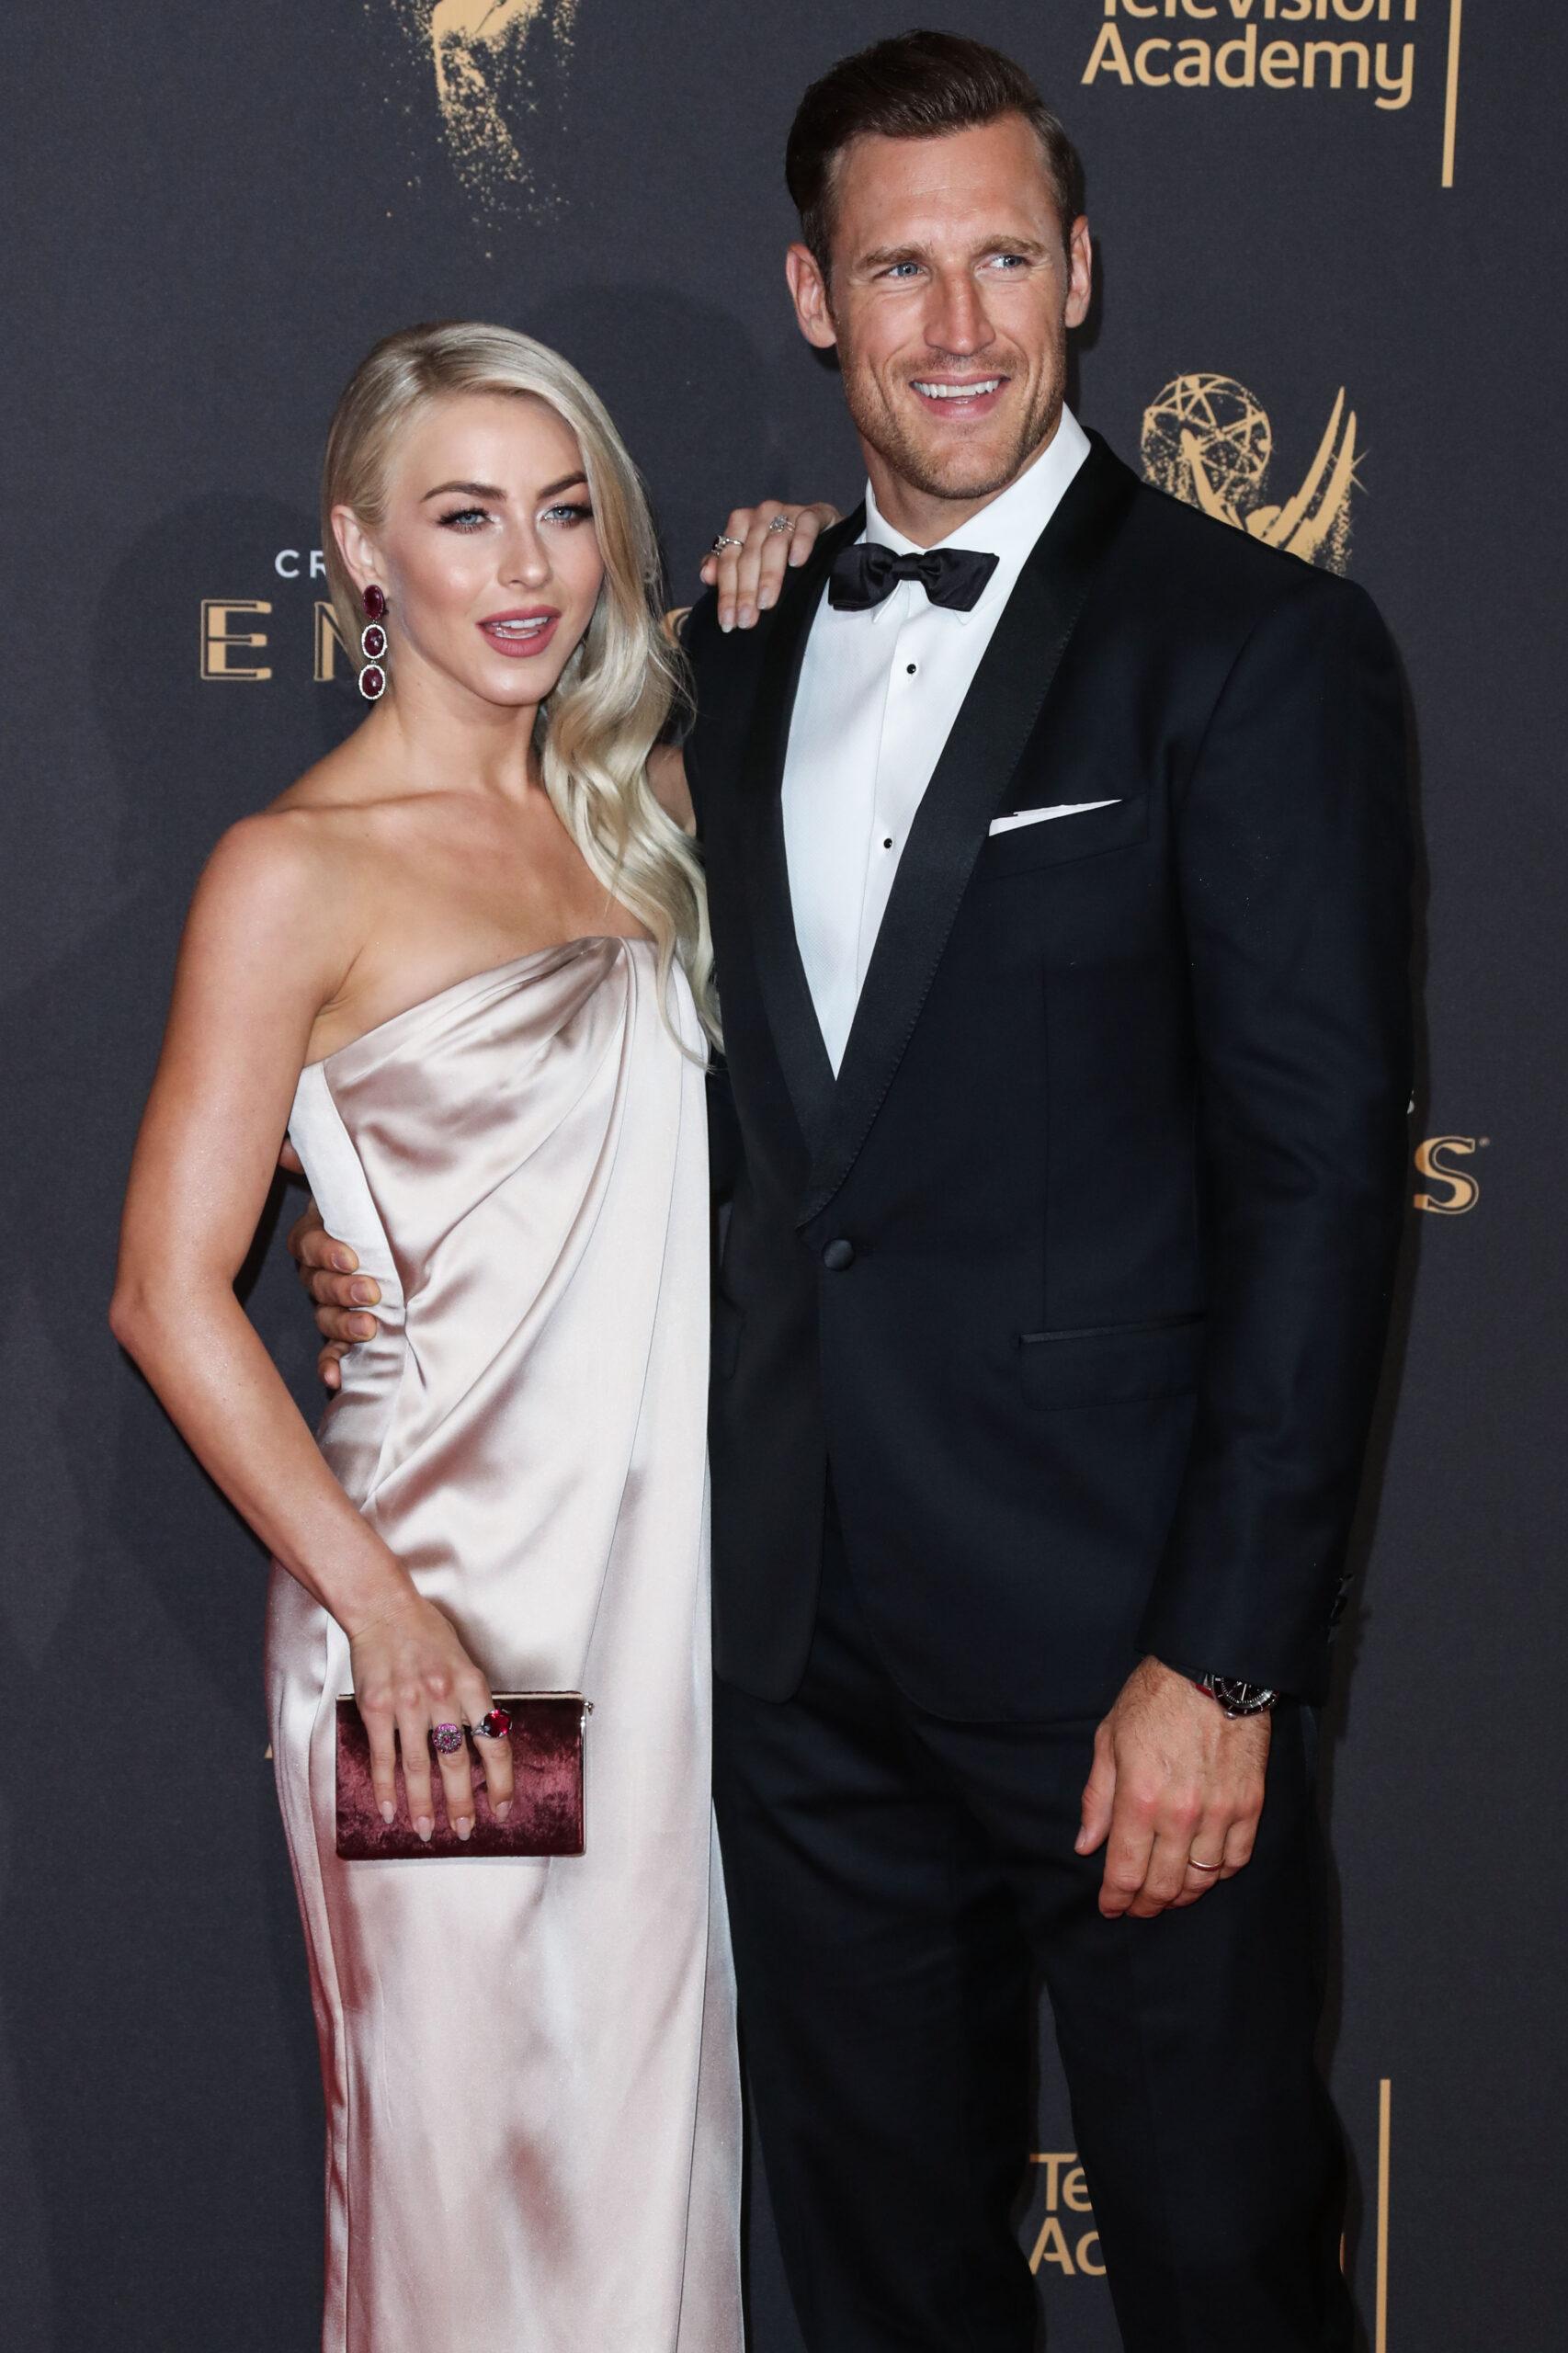 Julianne Hough and ex-husband Brooks Laich arrive at the 2017 Creative Arts Emmy Awards - Day 1